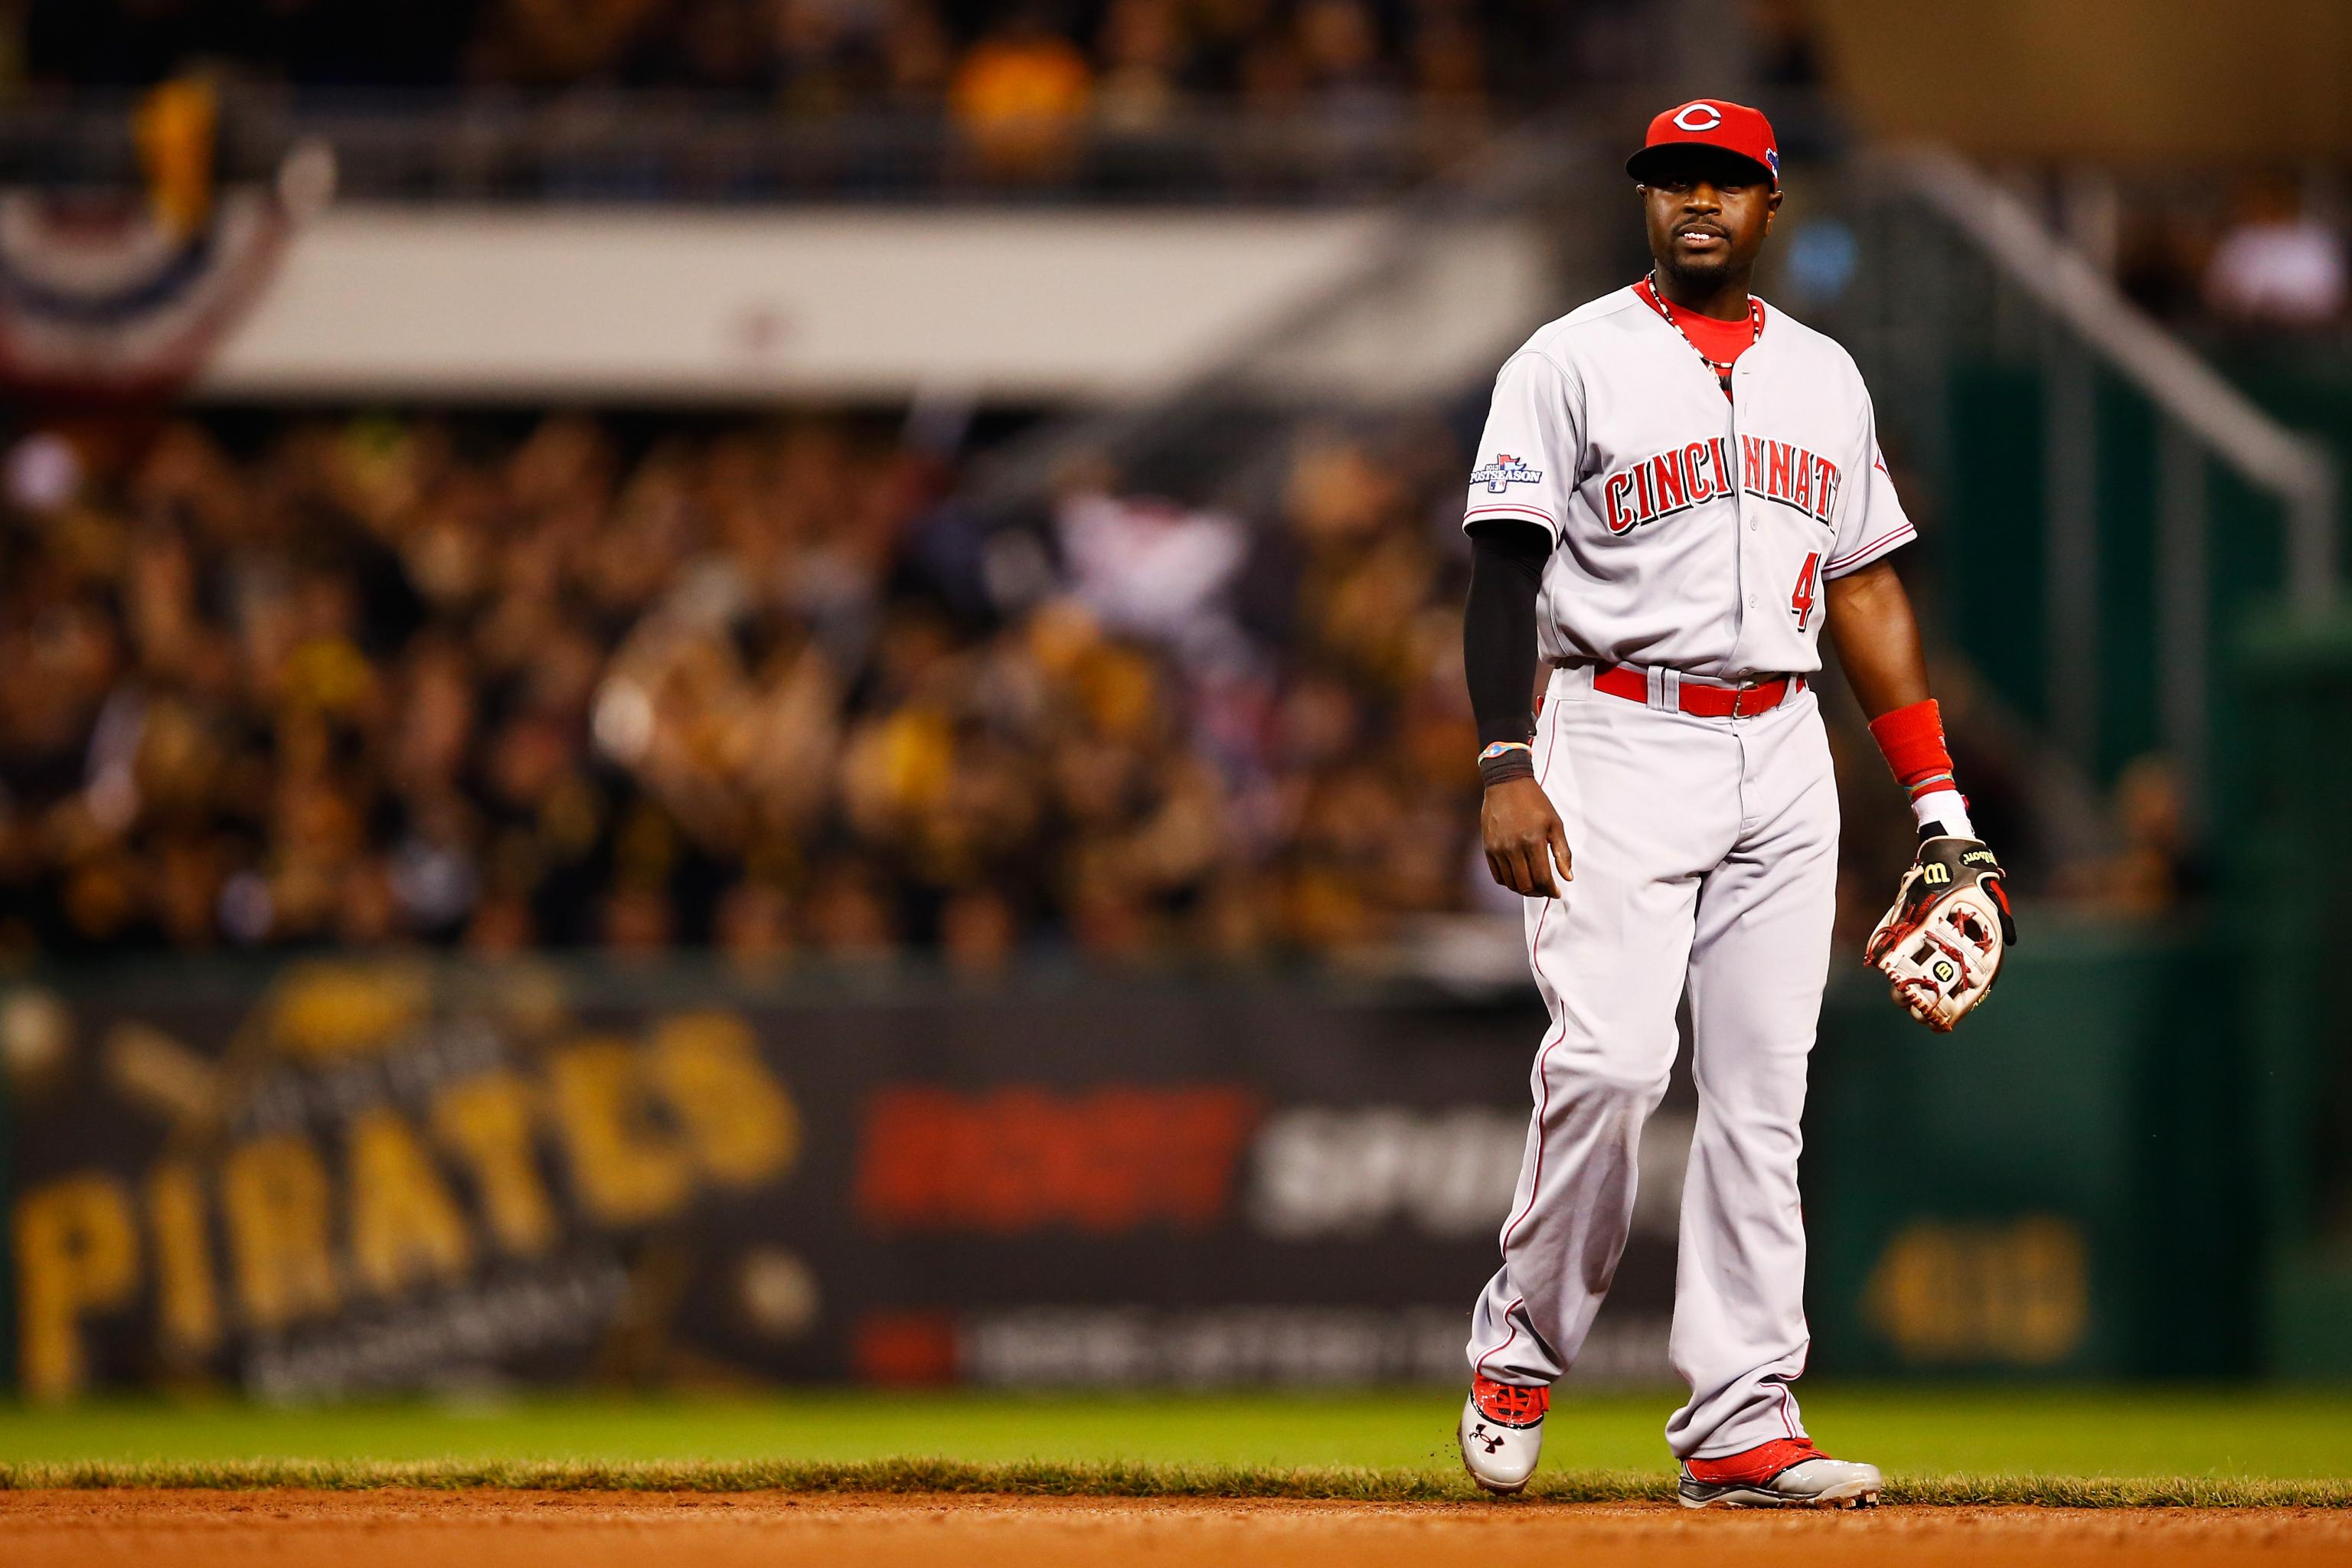 Is Brandon Phillips best to wear 0 jersey in MLB history? Not quite